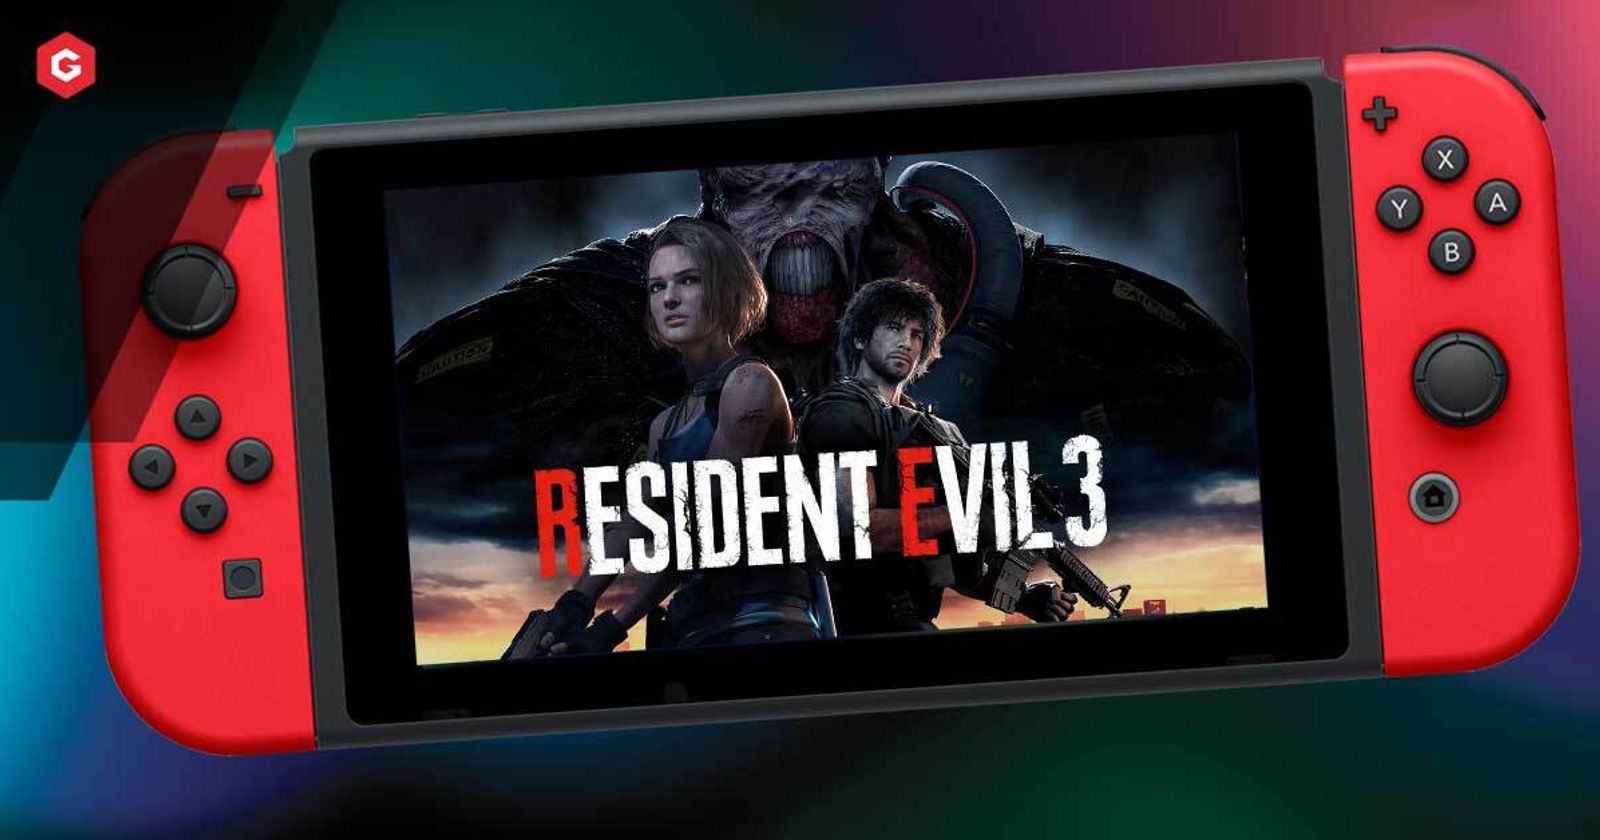 Resident Evil 3 Remake On Nintendo Switch Is Real, But There's A Catch